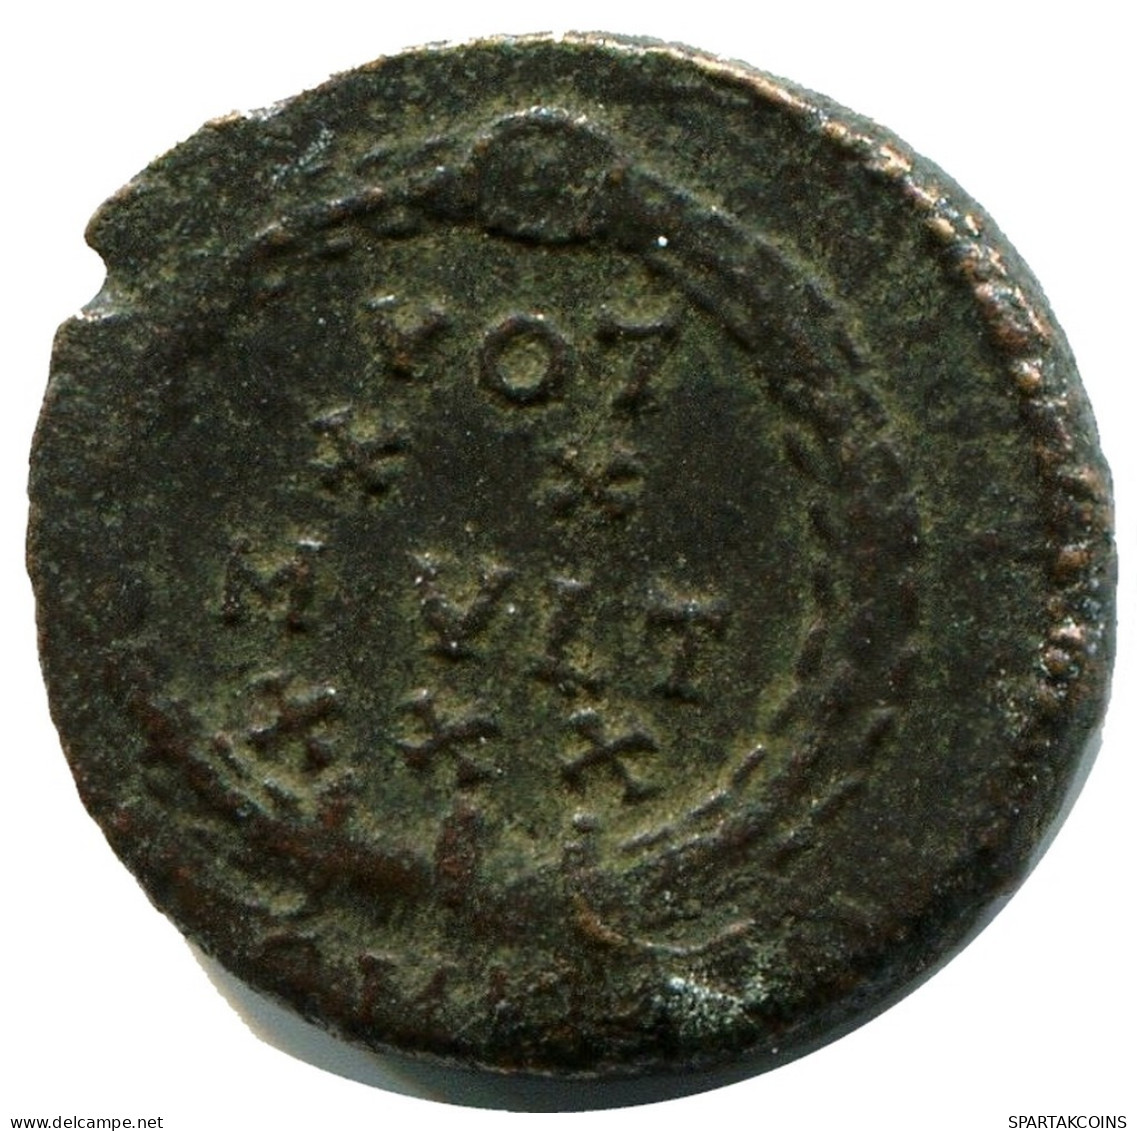 CONSTANS MINTED IN CYZICUS FROM THE ROYAL ONTARIO MUSEUM #ANC11654.14.D.A - El Imperio Christiano (307 / 363)